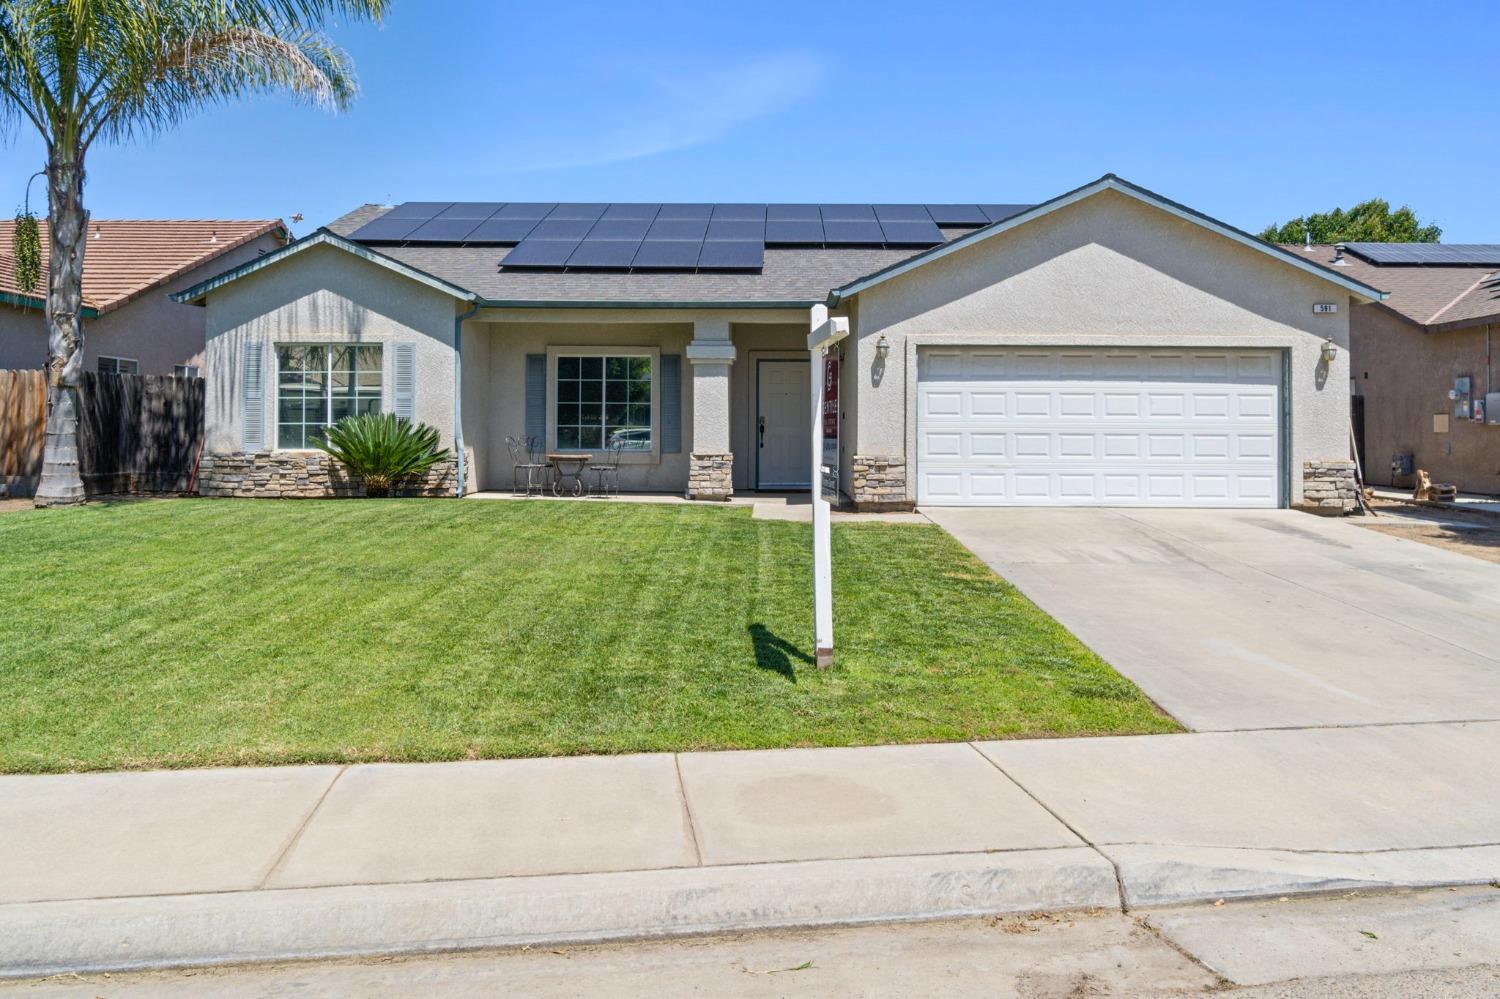 Photo of 591 W Lindquist St in Kingsburg, CA